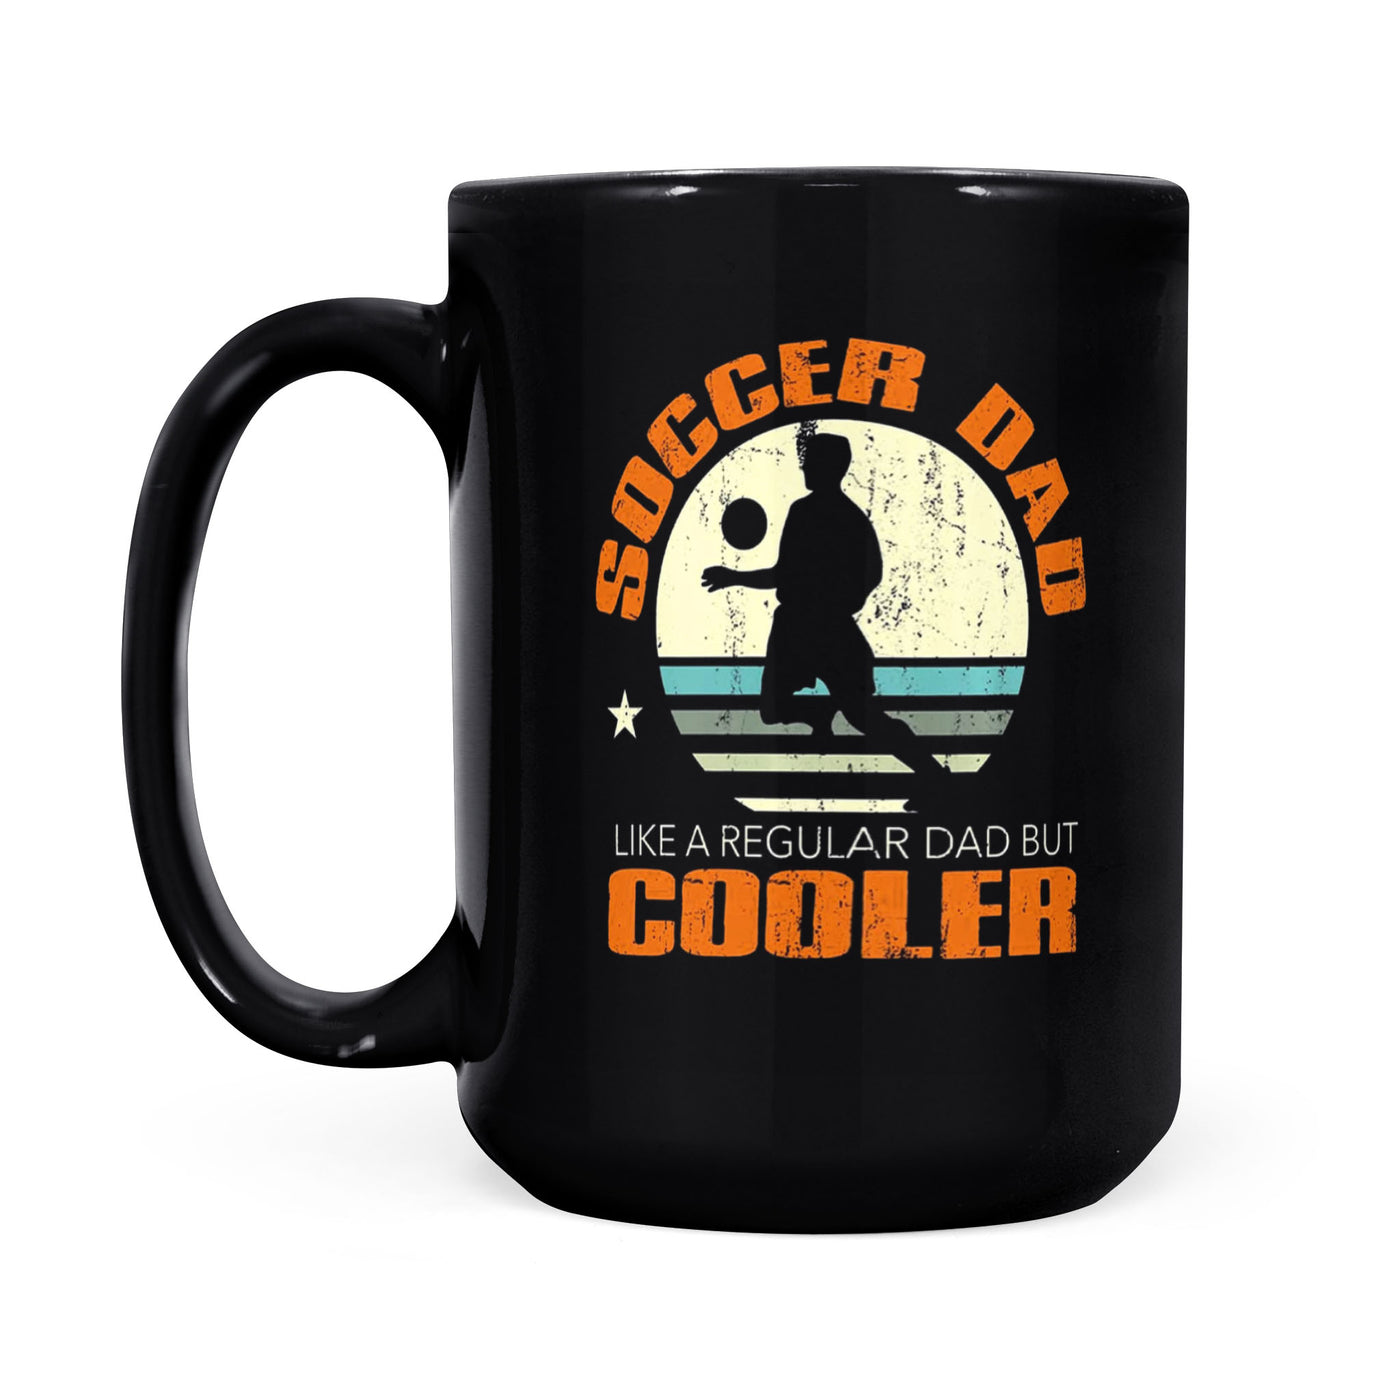 Gift For Sporting Dad - Father's Day Gift 2021 - Black Coffee Mug